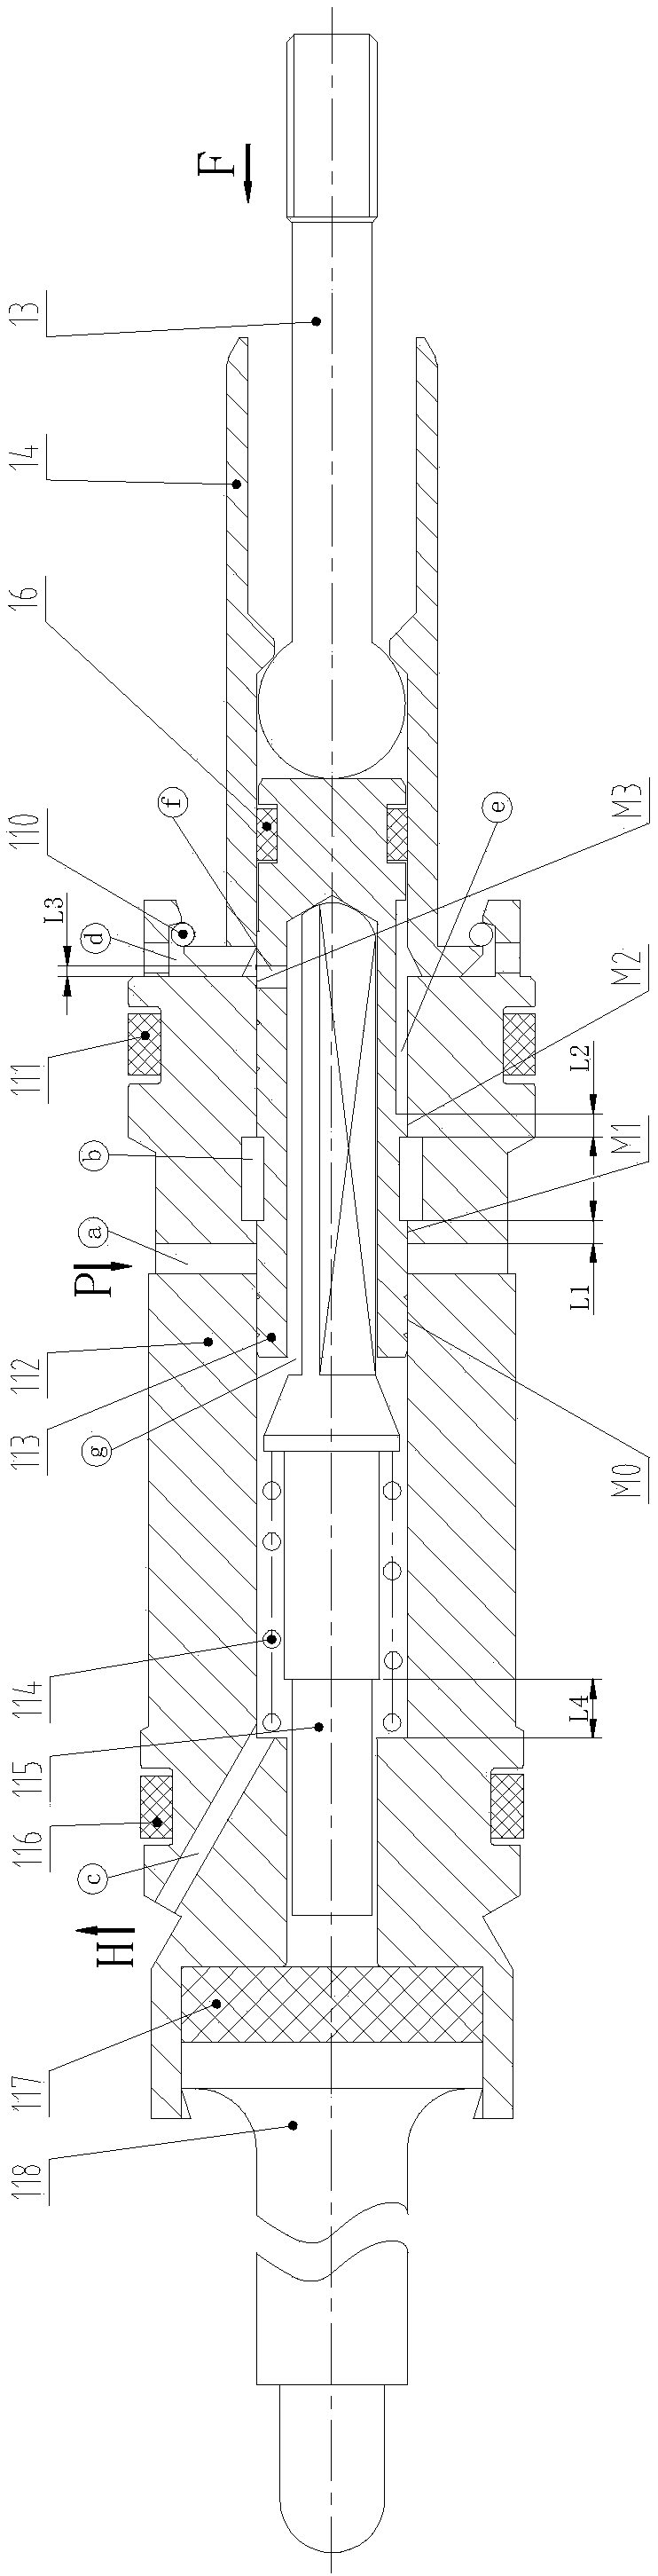 Hydraulic booster assembly device